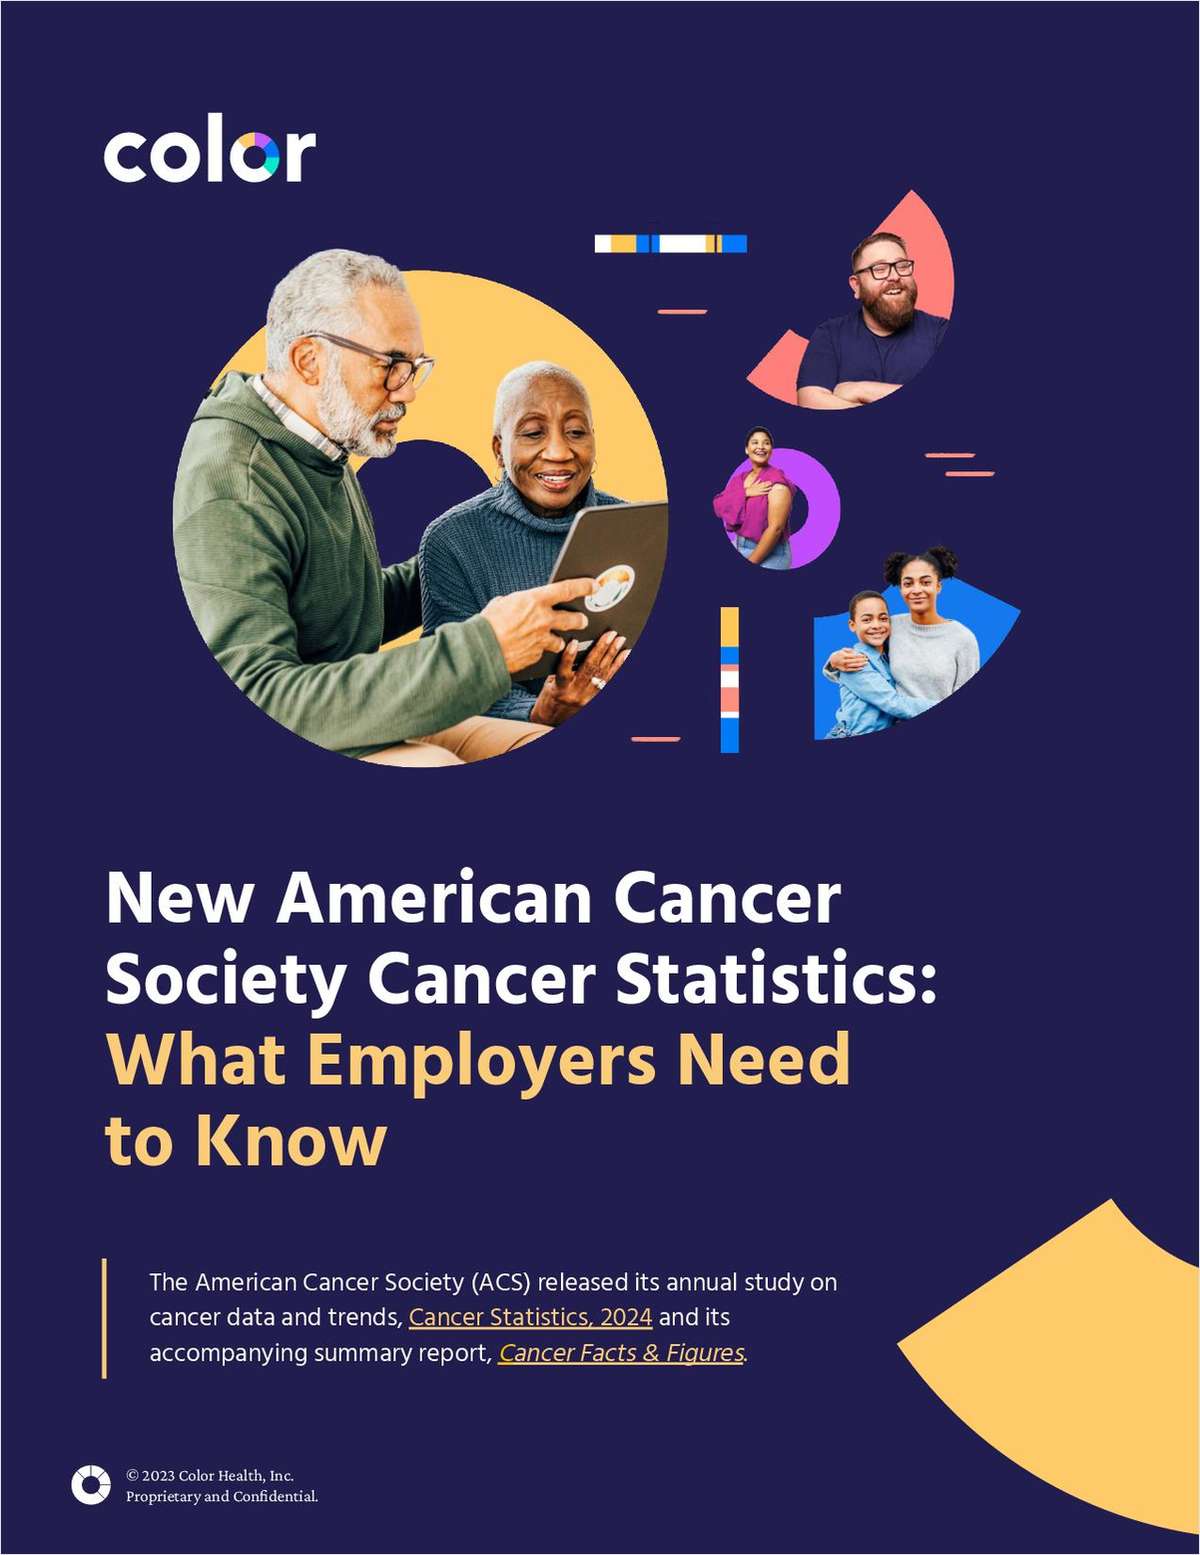 New American Cancer Society Cancer Statistics: What Employers Need to Know